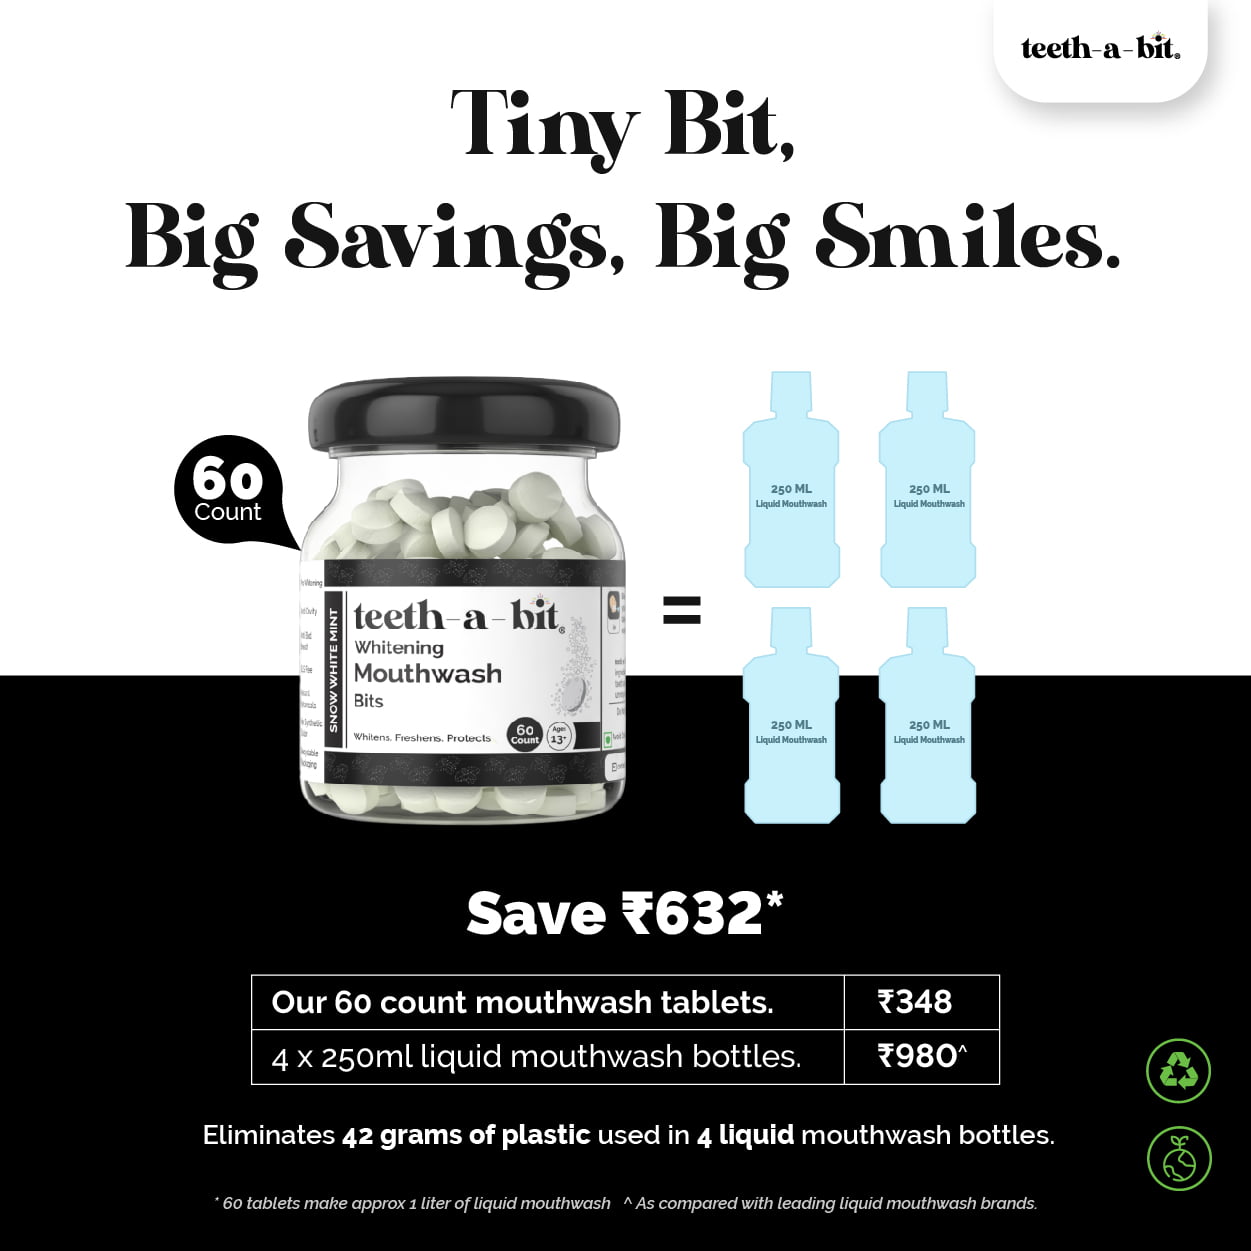 teeth-a-bit Teeth Whitening Snow White Mint Mouthwash Bits | Enamel Safe, Removes Stains | No Alcohol | Fights Germs | Freshens Mouth | Equal to 1200ml of liquid mouthwash